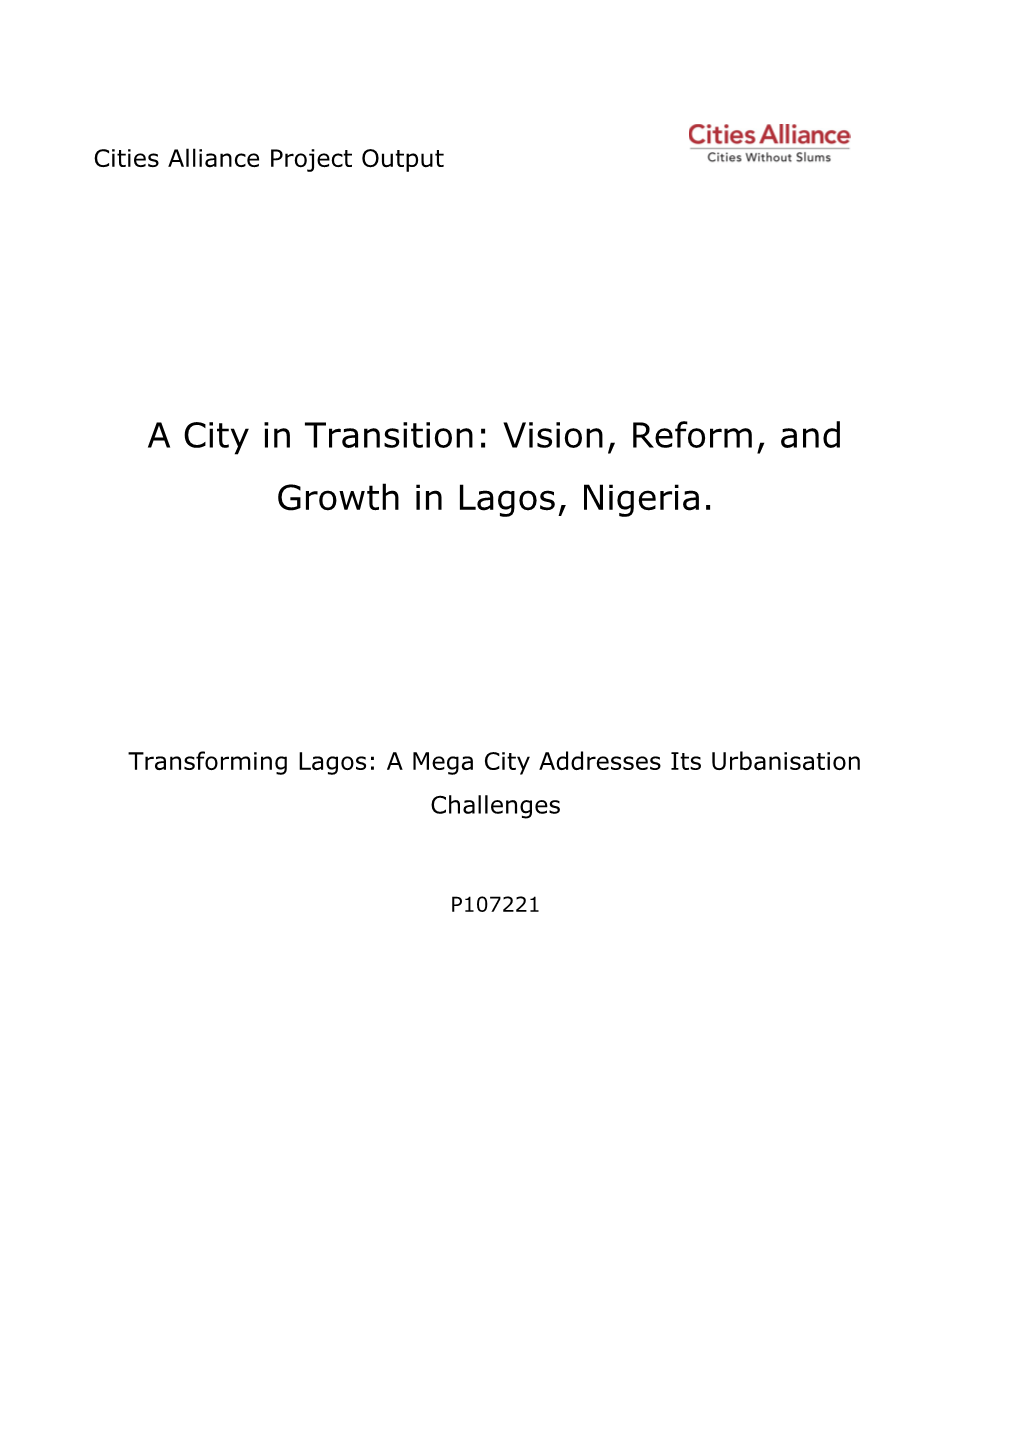 A City in Transition: Vision, Reform, and Growth in Lagos, Nigeria